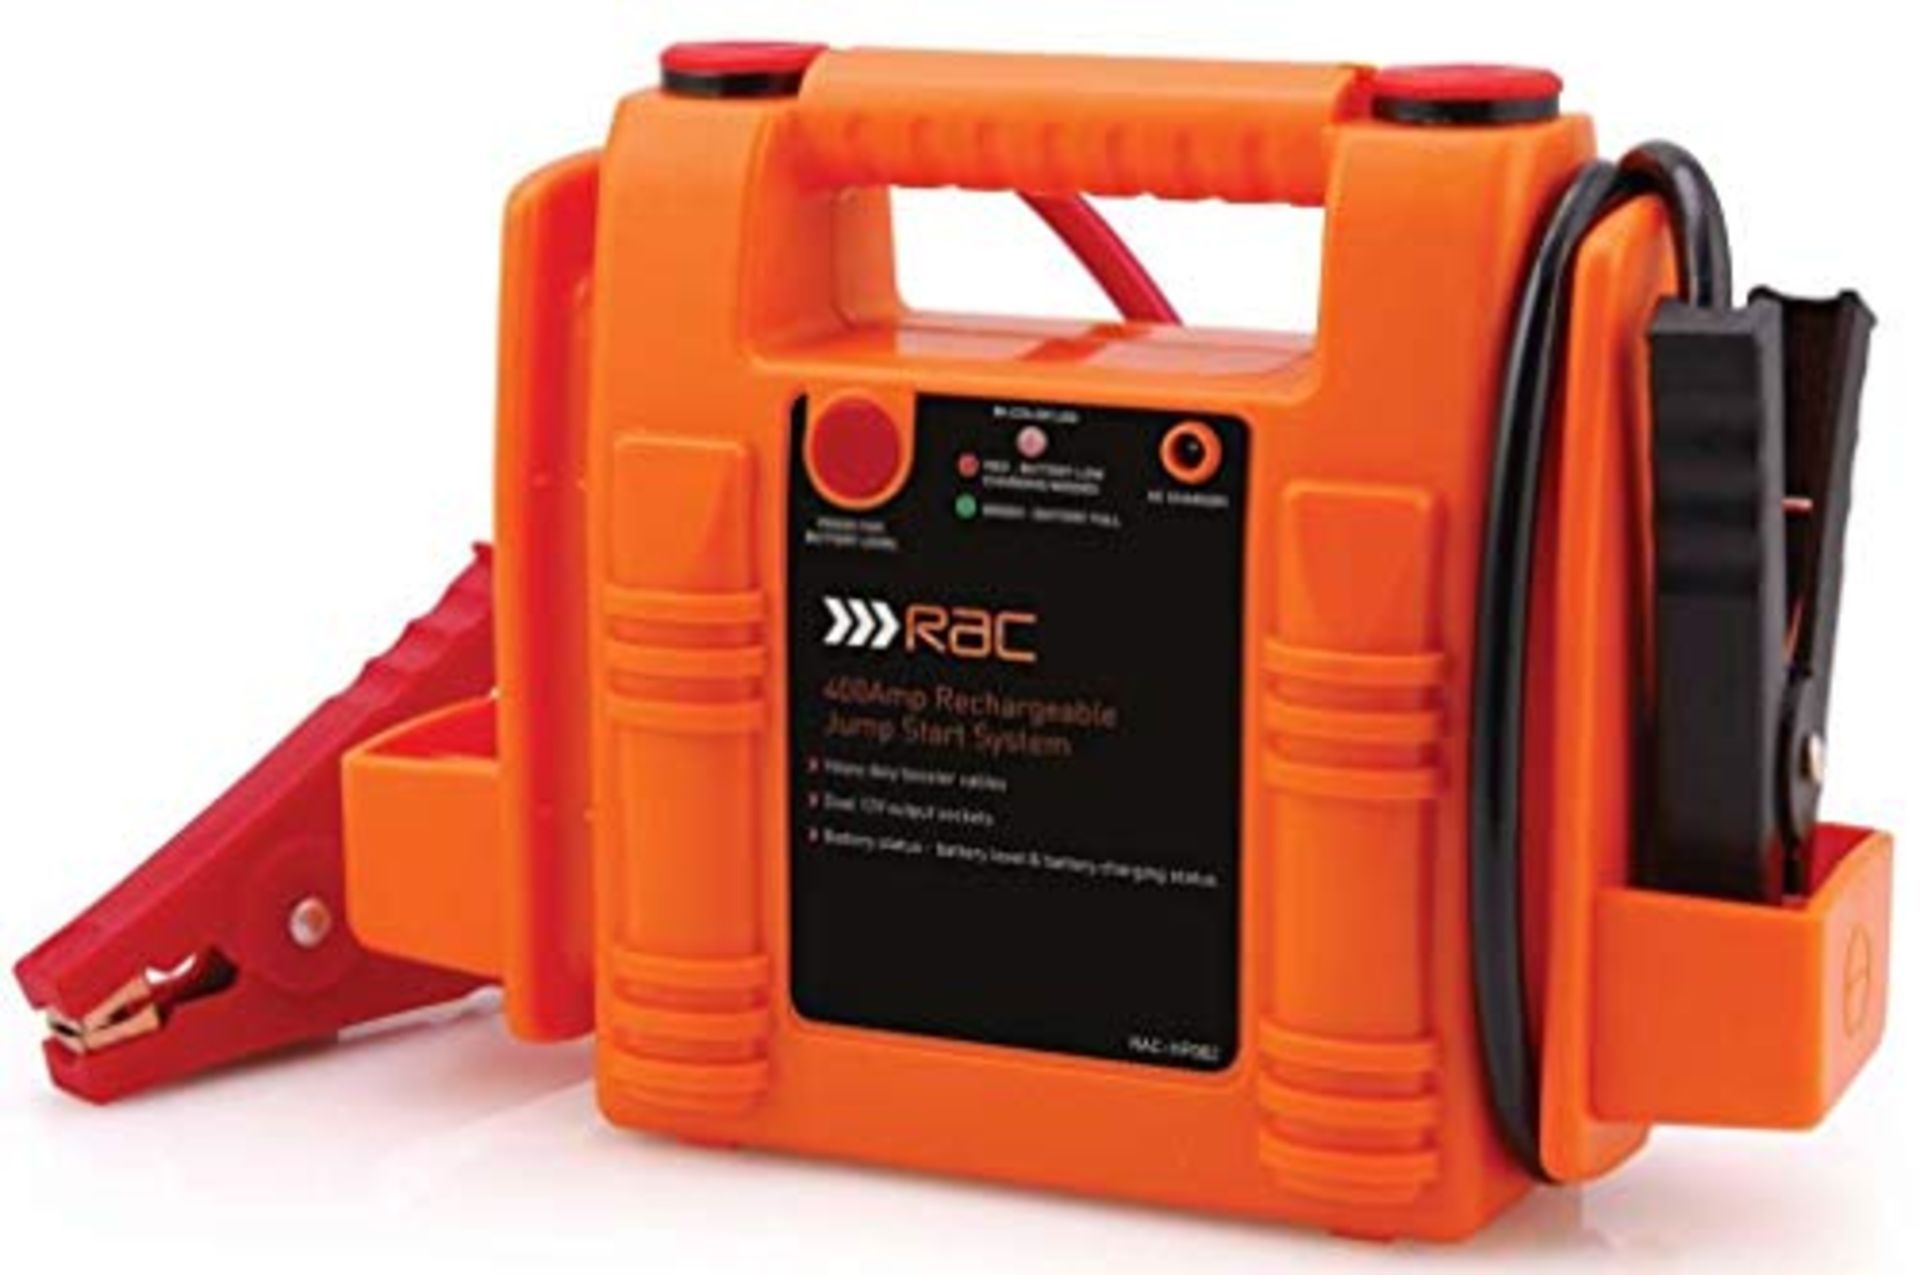 RAC 400 Amp Rechargeable Jump Start System HP082 - For Car Batteries up to 1500cc, Ora - Image 2 of 2